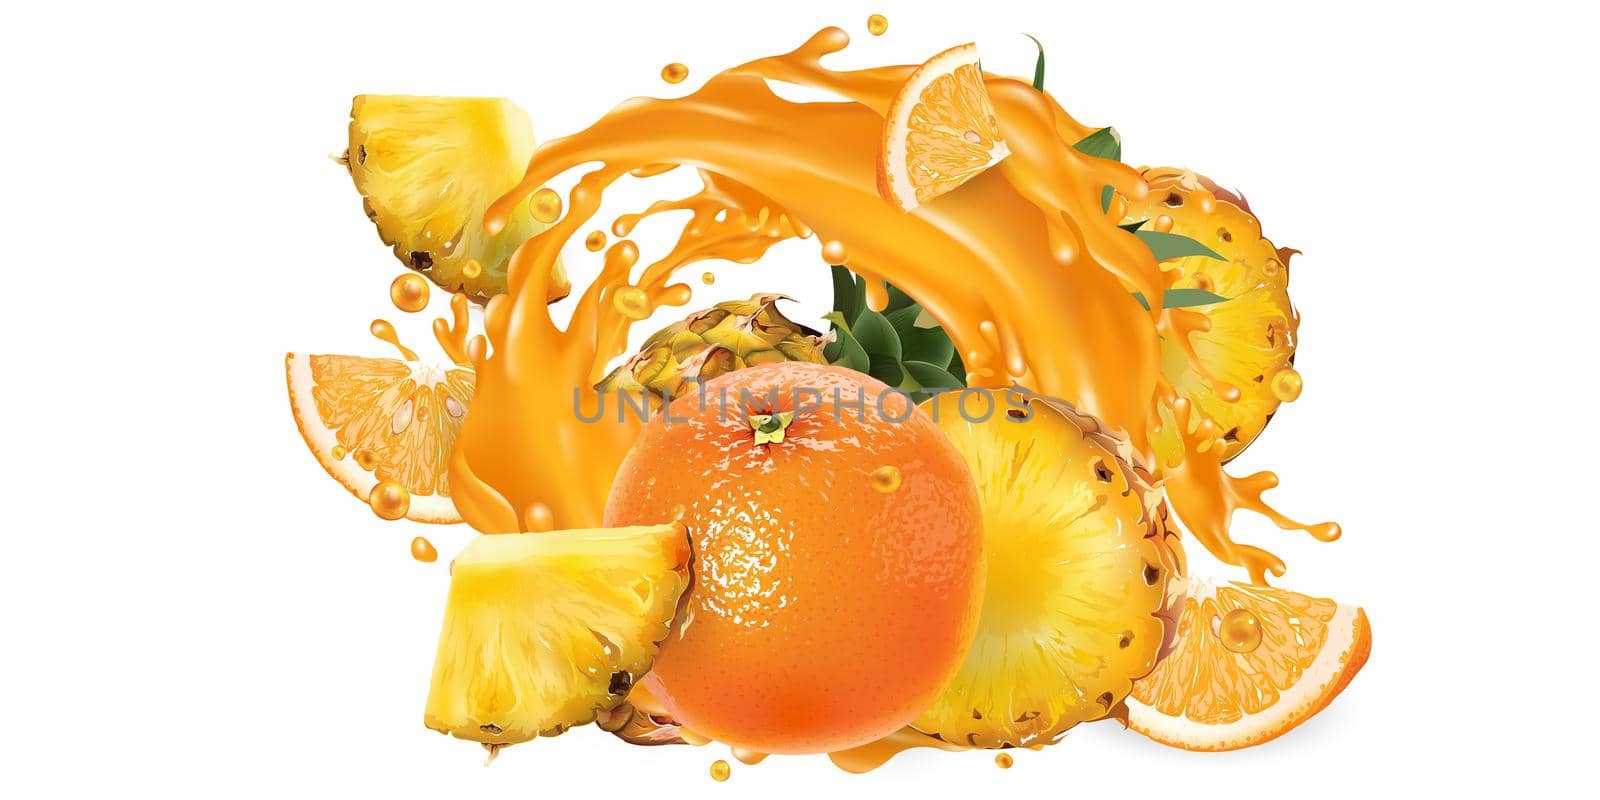 Fresh pineapples and oranges and a splash of fruit juice on a white background. Realistic style illustration.